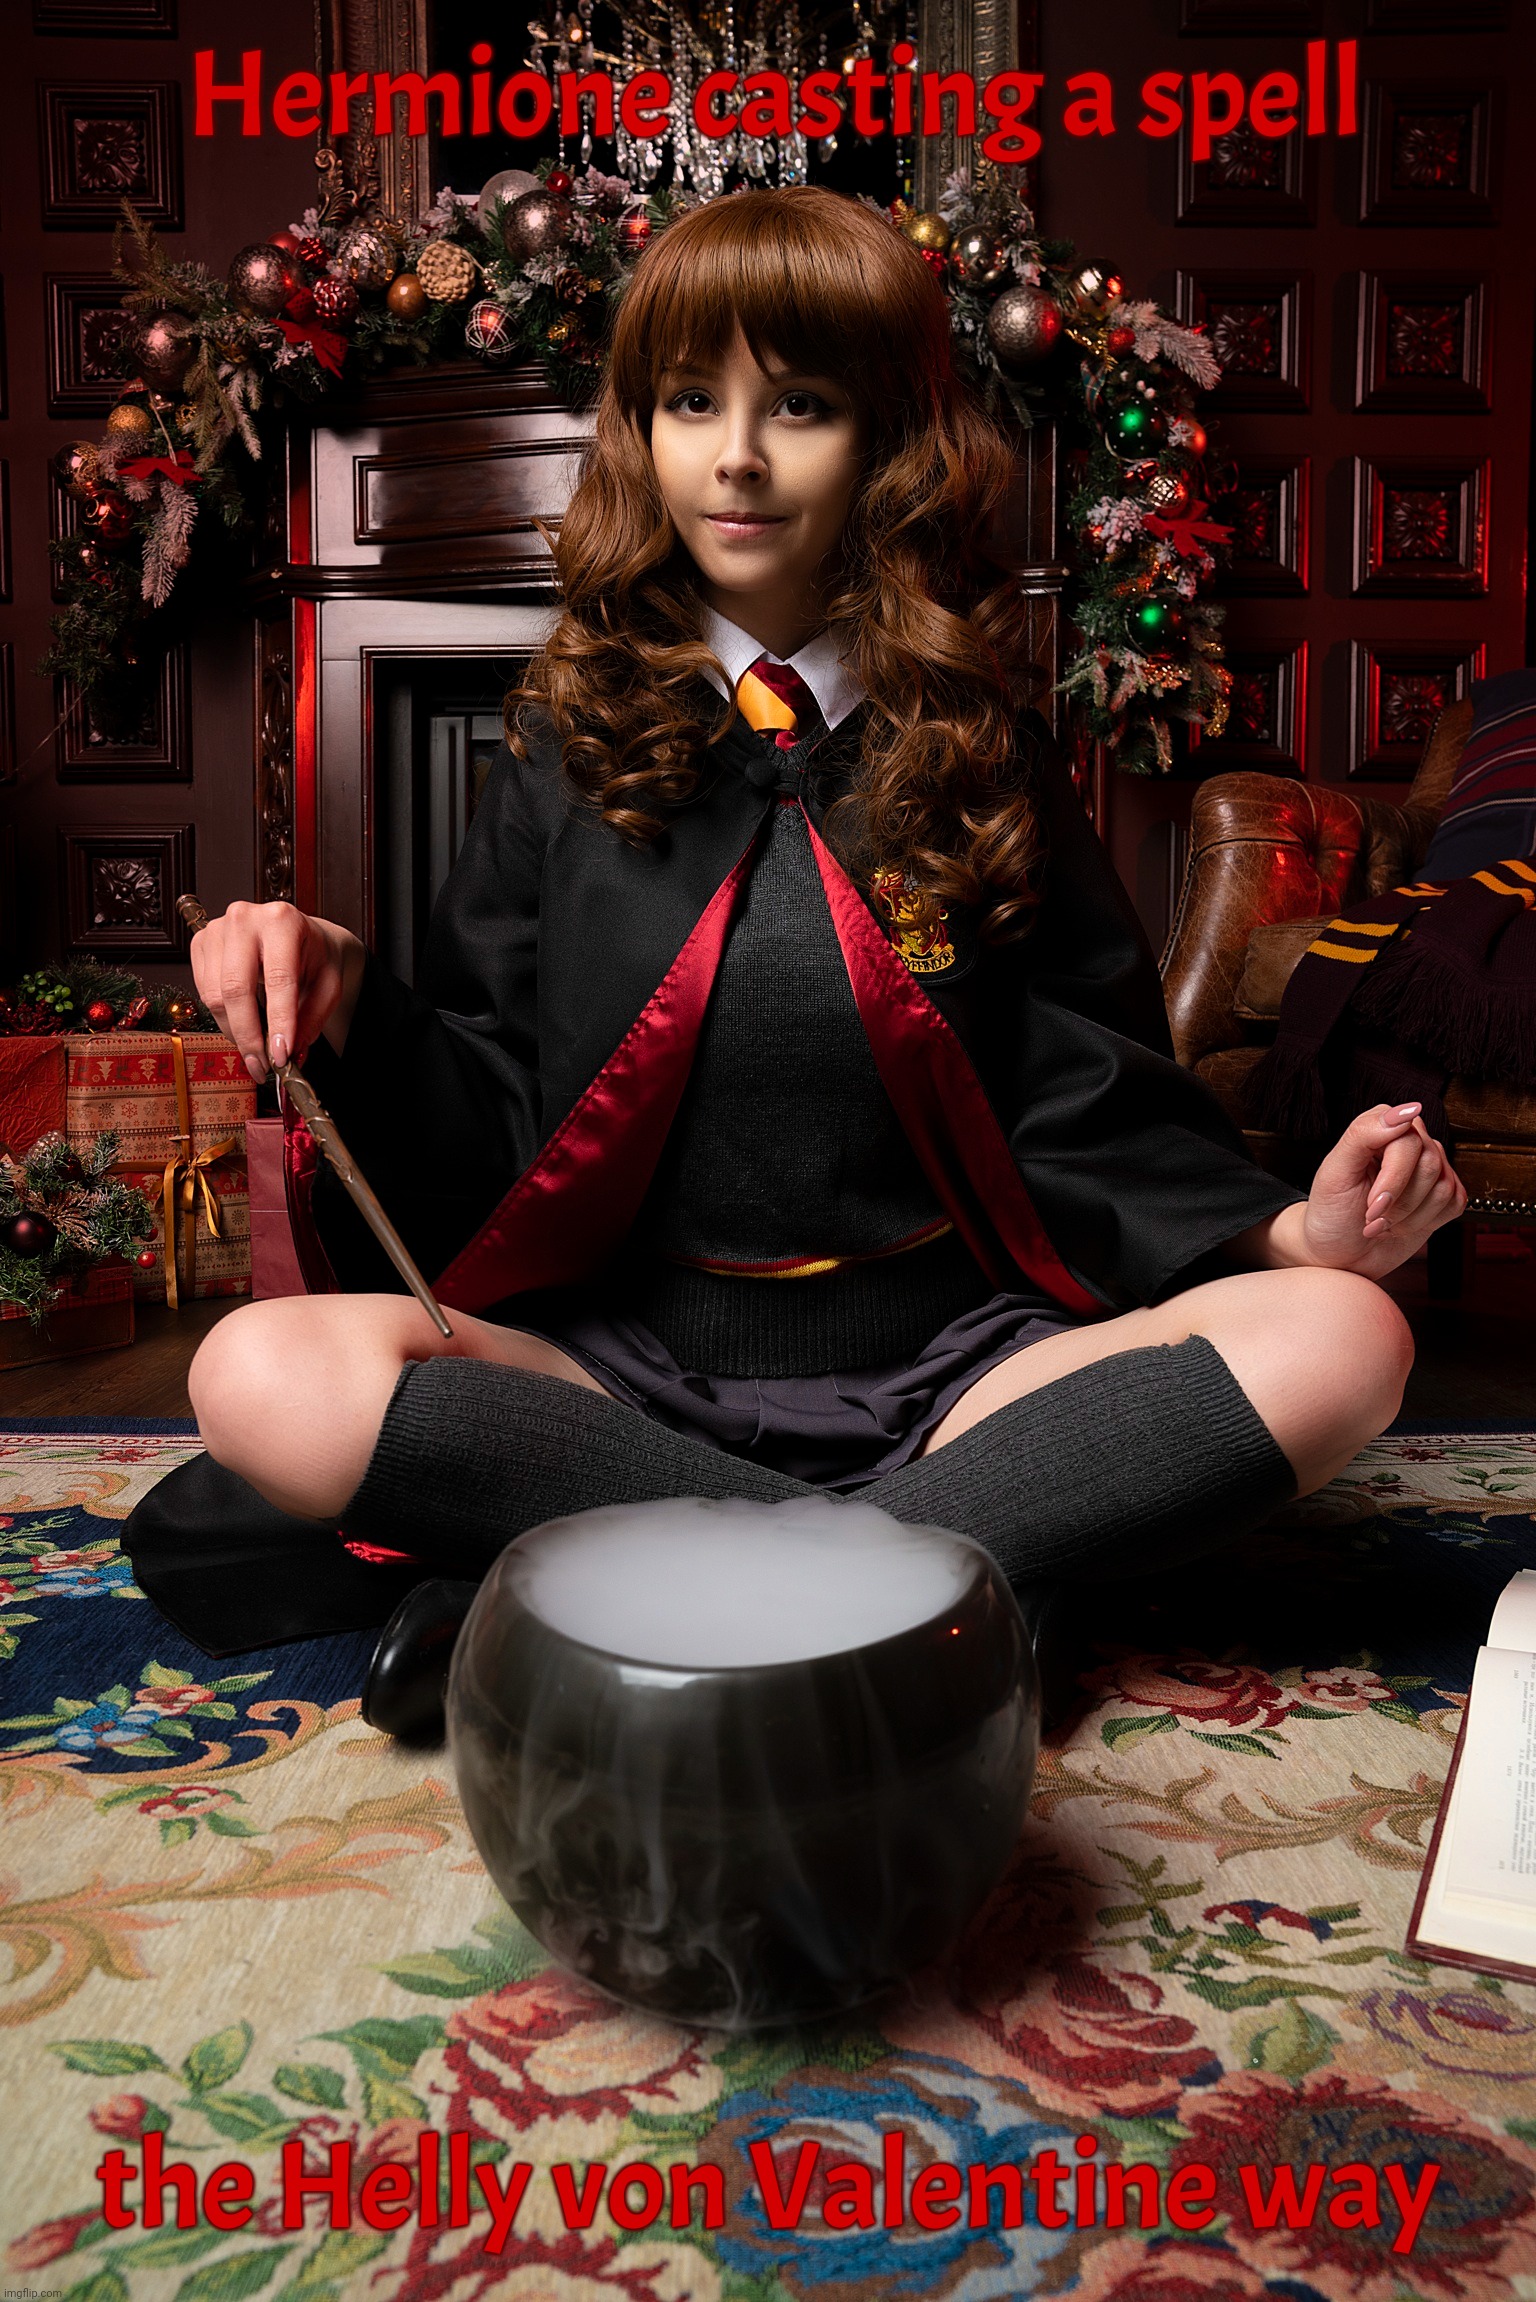 Hermione a la Helly von Valentine | Hermione casting a spell the Helly von Valentine way | image tagged in helly von valentine,hermione granger,harry potter,casting a spell,cosplay | made w/ Imgflip meme maker